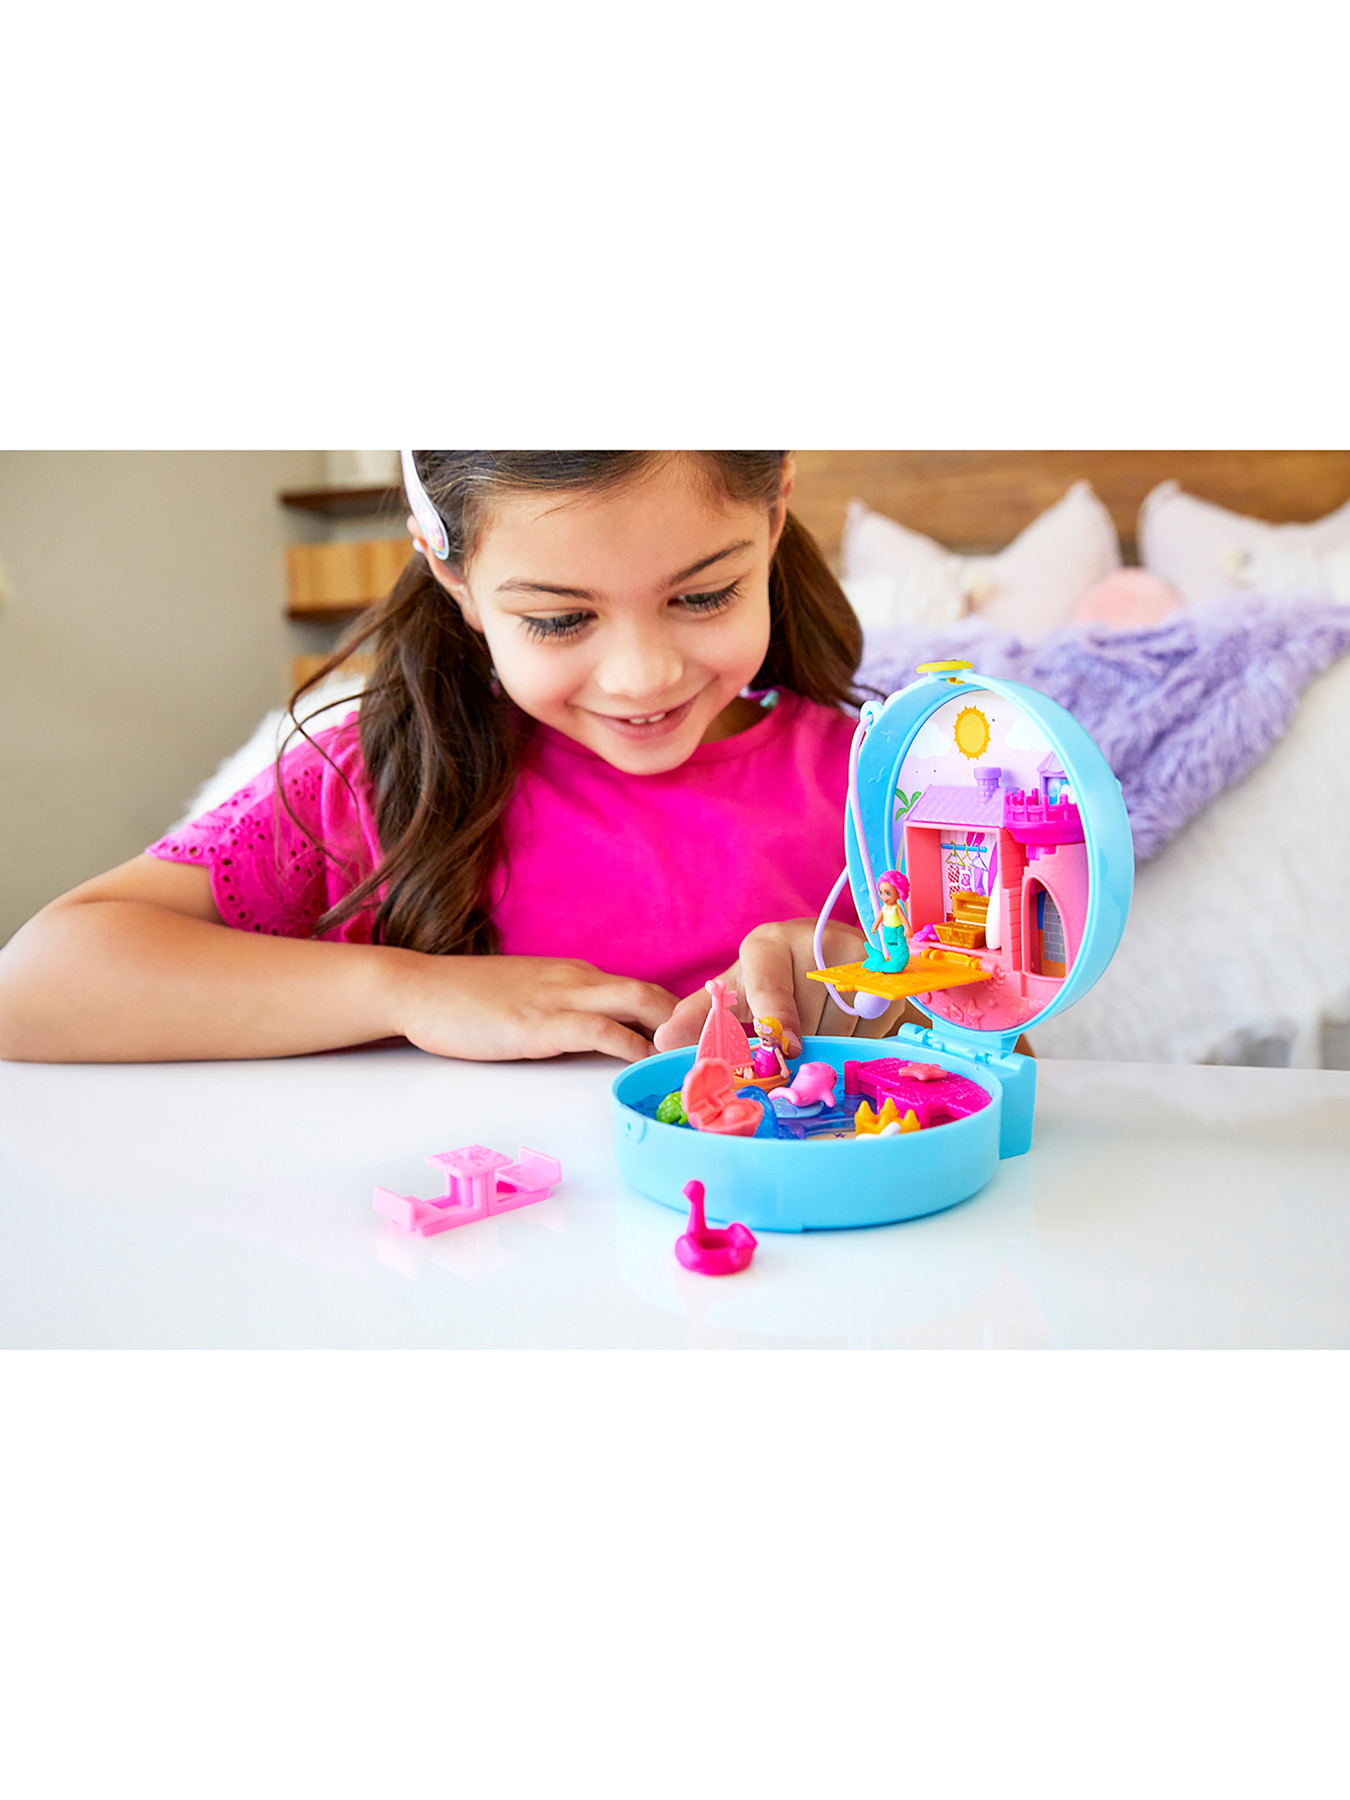 Polly Pocket Dolphin Beach Compact Playset | Action Figures & Dolls ...